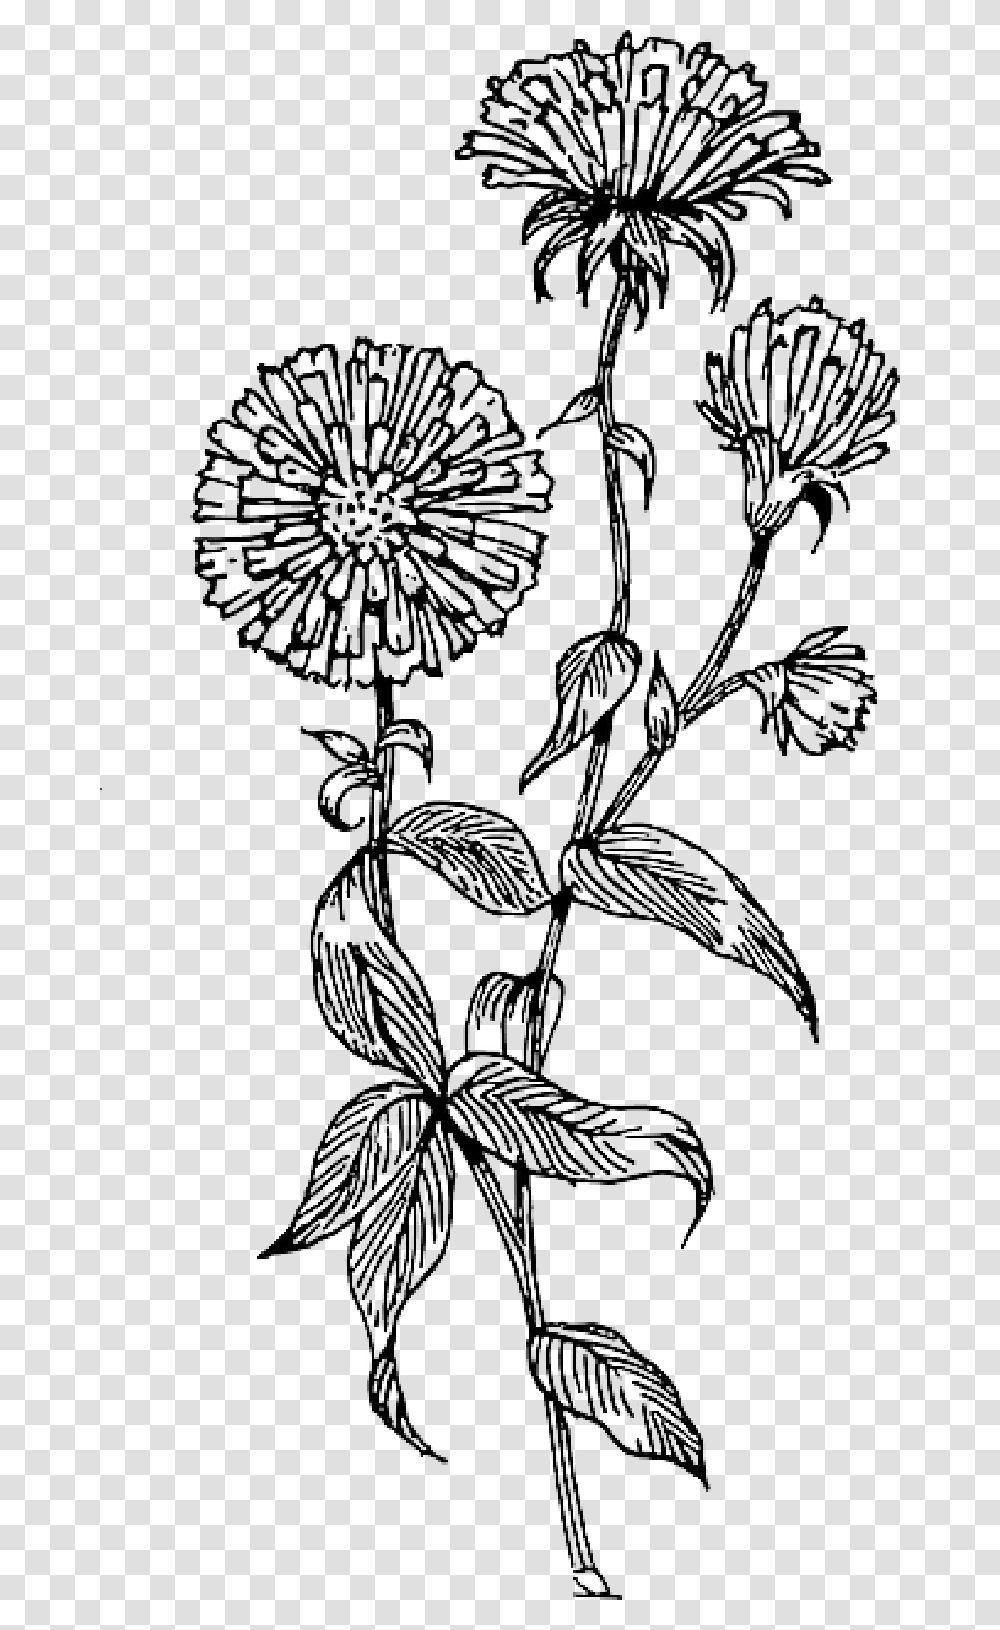 Wildflowers Drawing Wildflower Tattoo Aster Vector, Plant, Blossom, Dandelion, Bird Transparent Png